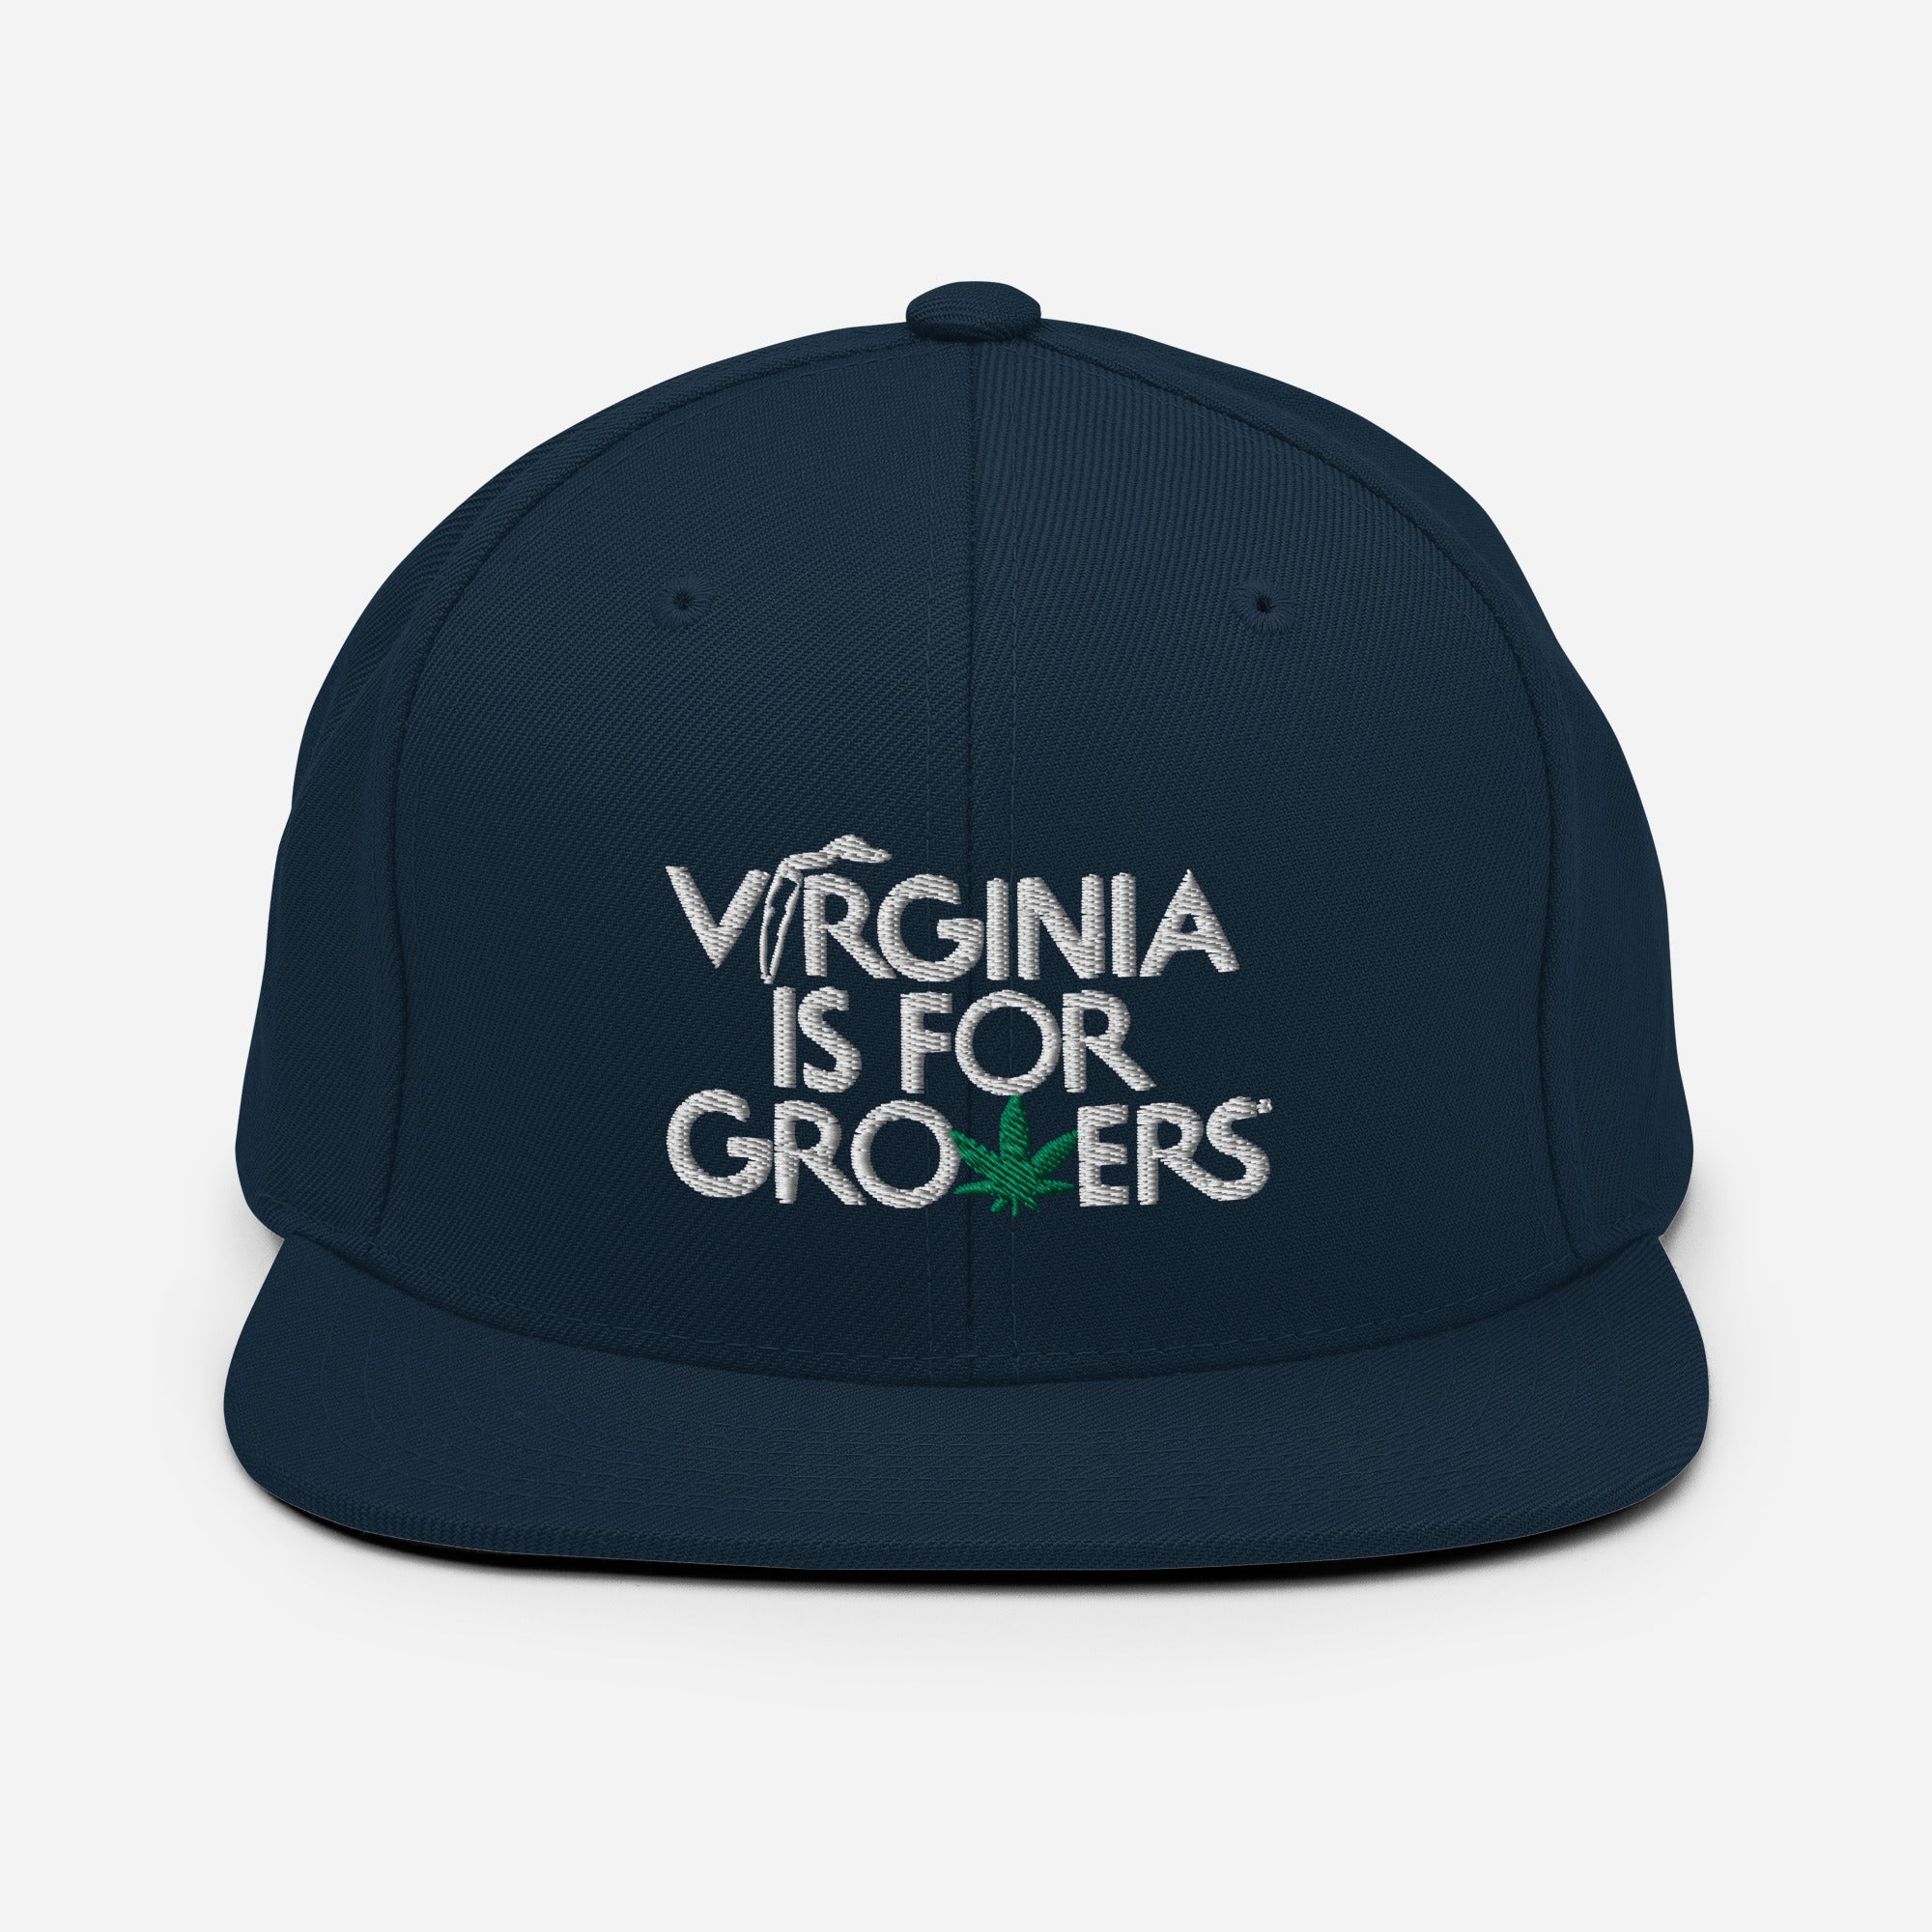 "VA is for Growers" Snapback Hat